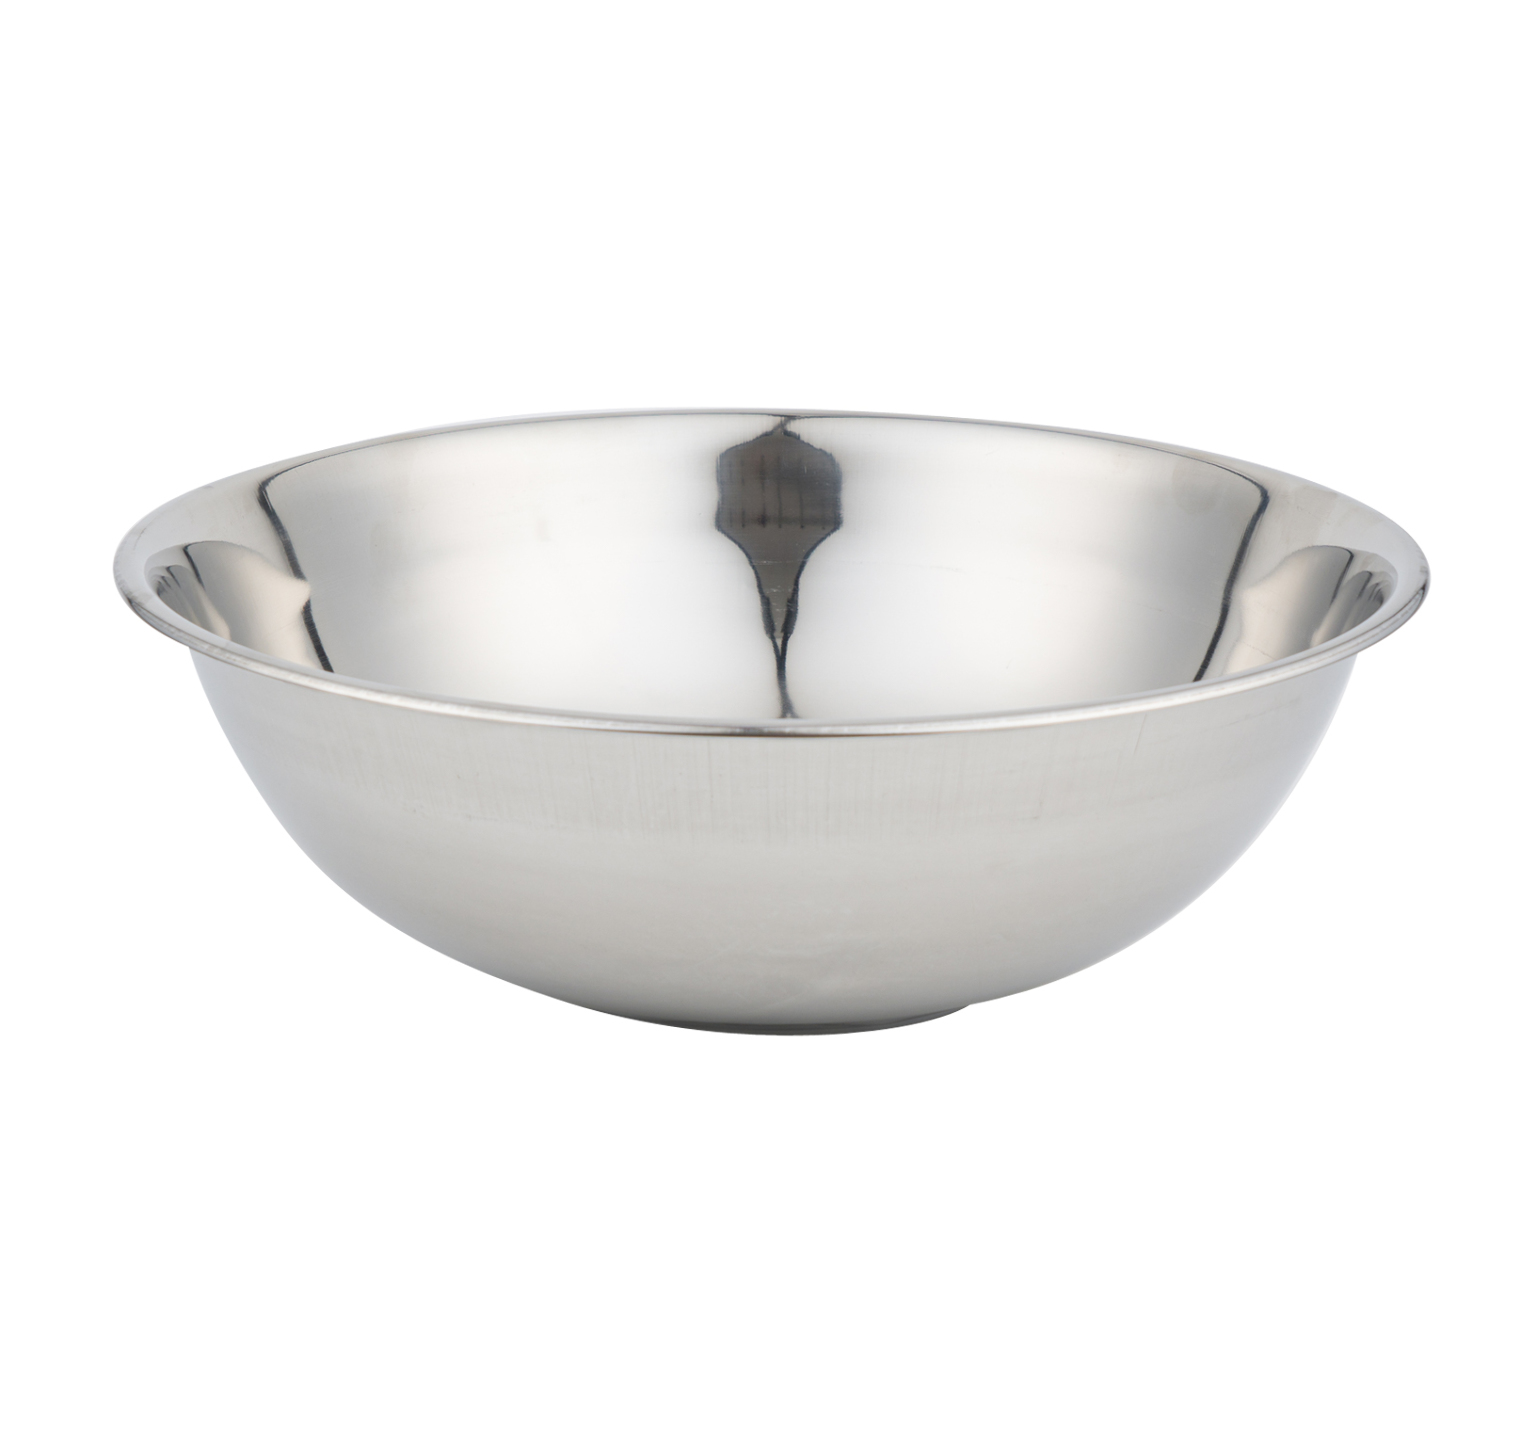 Mixing Bowls - Stainless Steel, 14.4